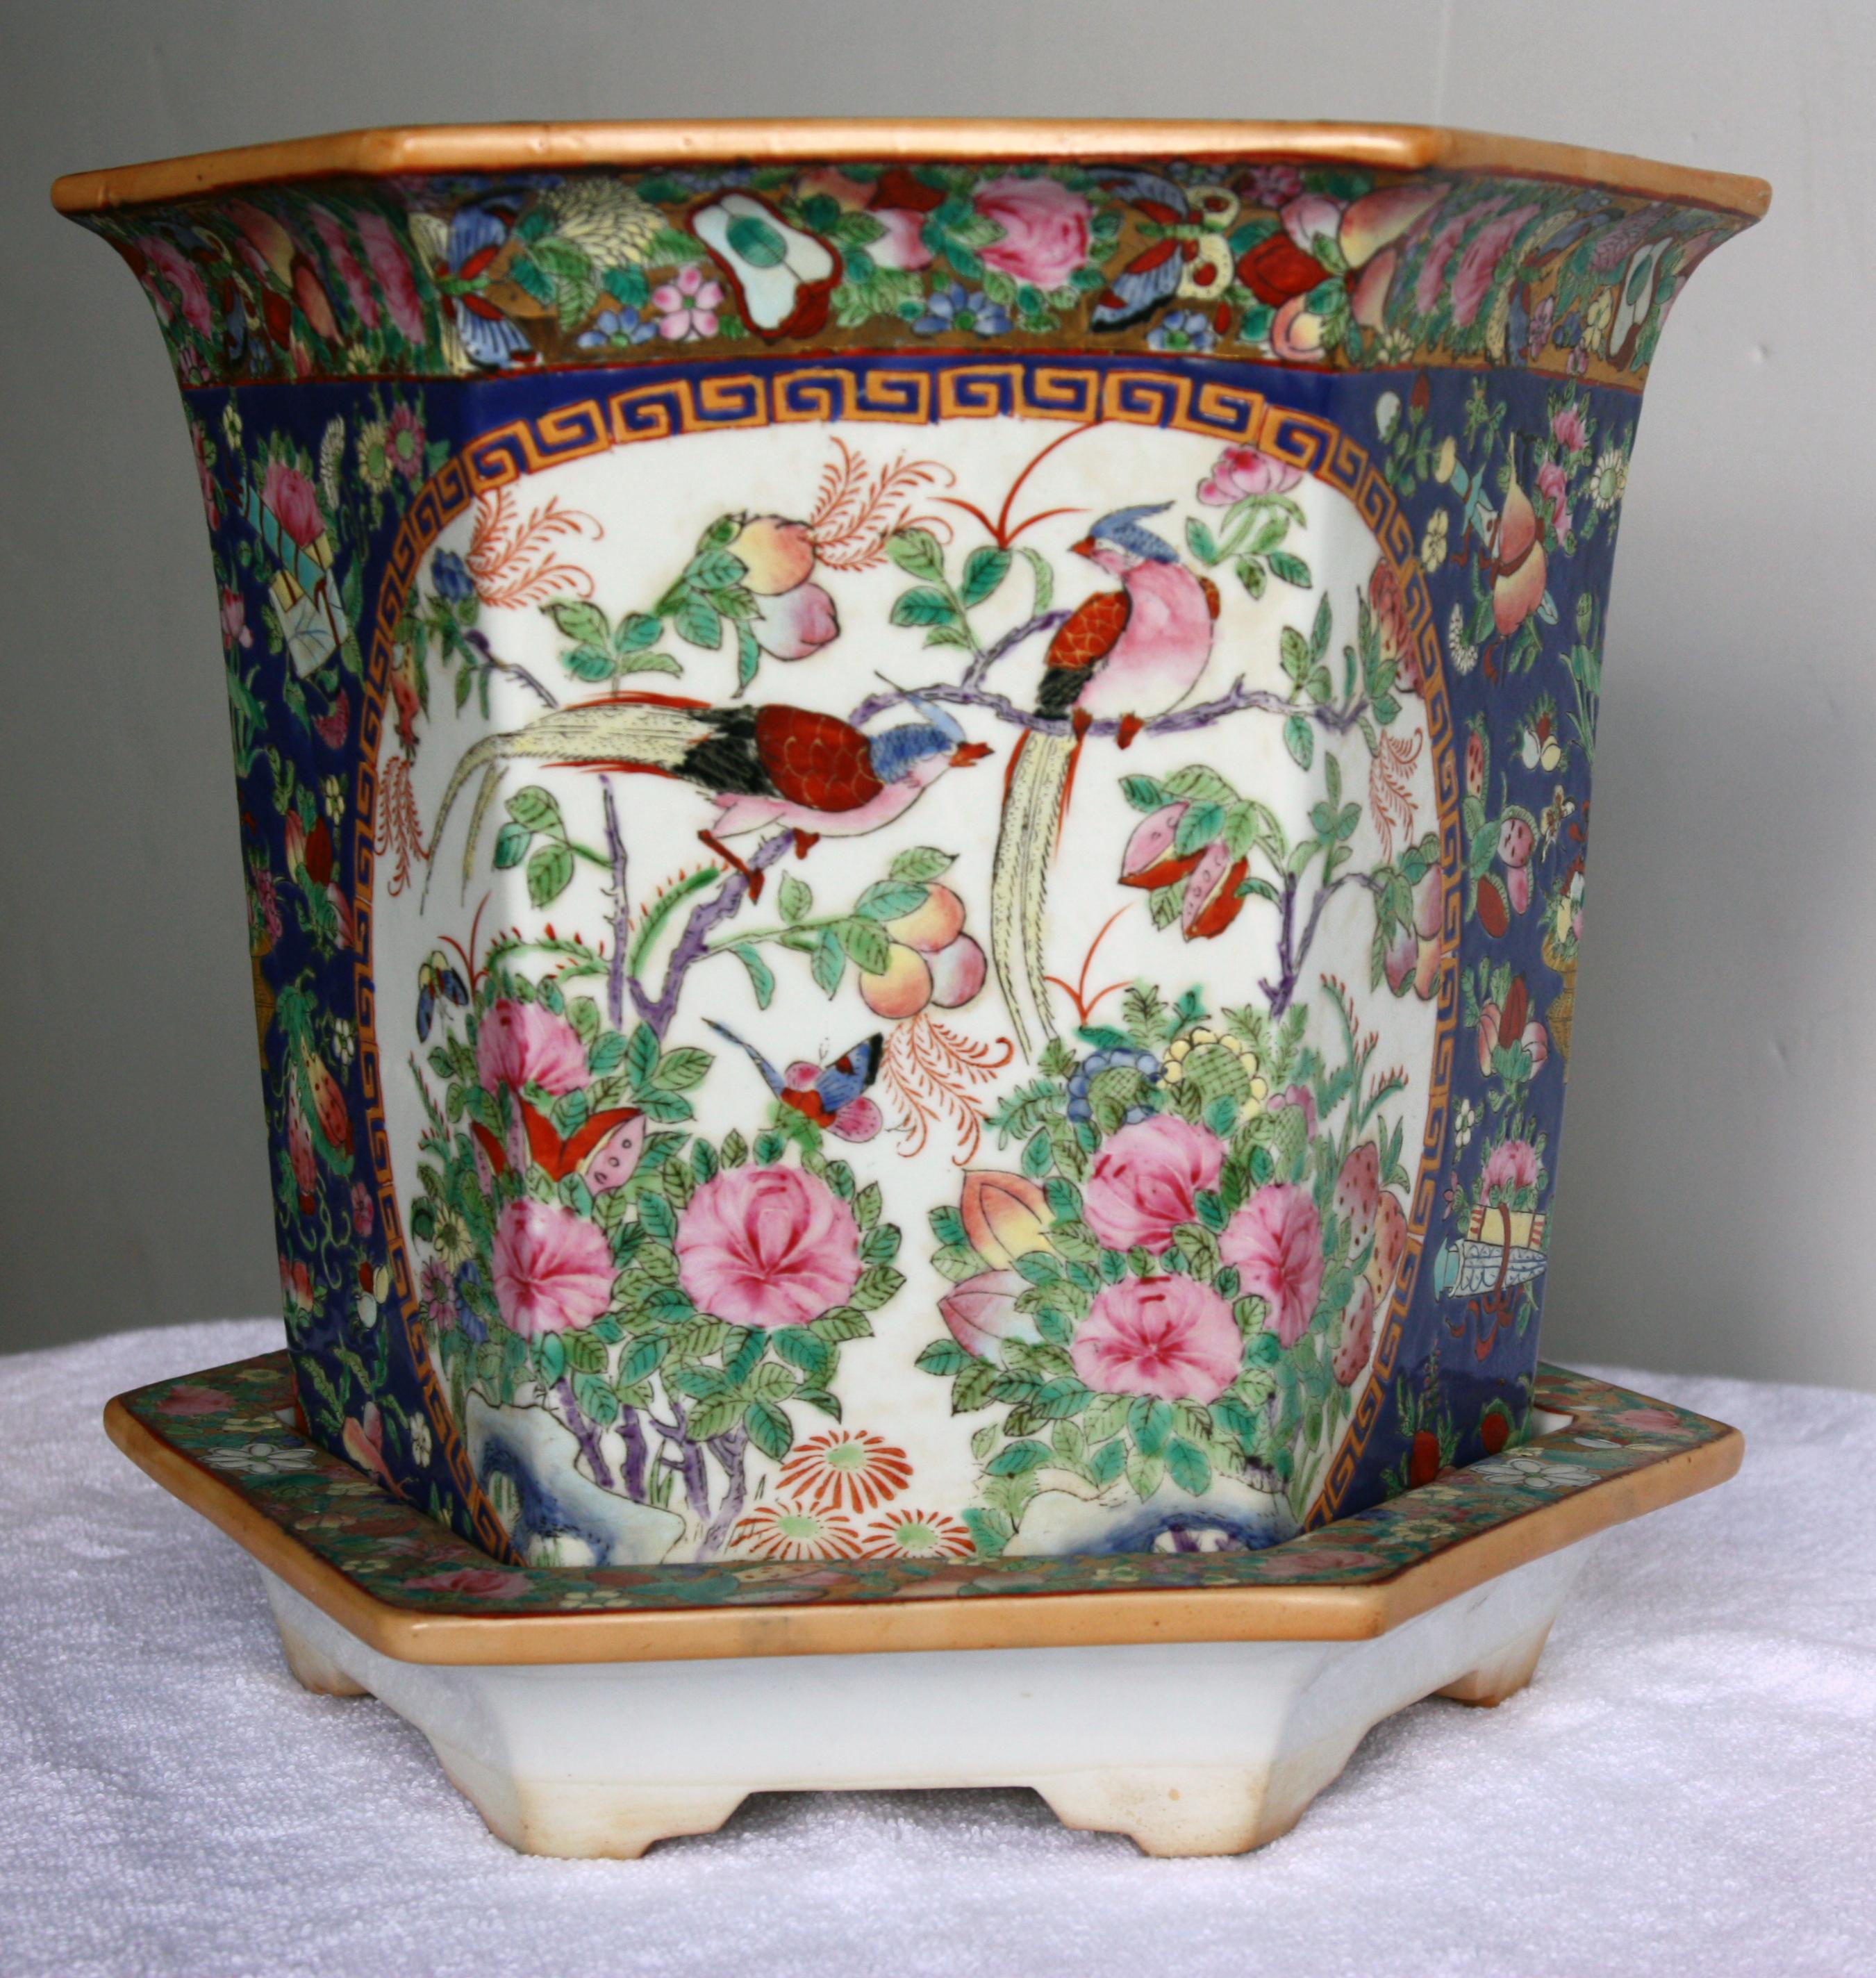 Pair of different sized, beautifully hand-painted jardinières with plates. Signature stamp on the bottom.  One large and one small. They both depict a garden scene with birds. 


Dimensions of smaller jardinière:
Diameter 6.5